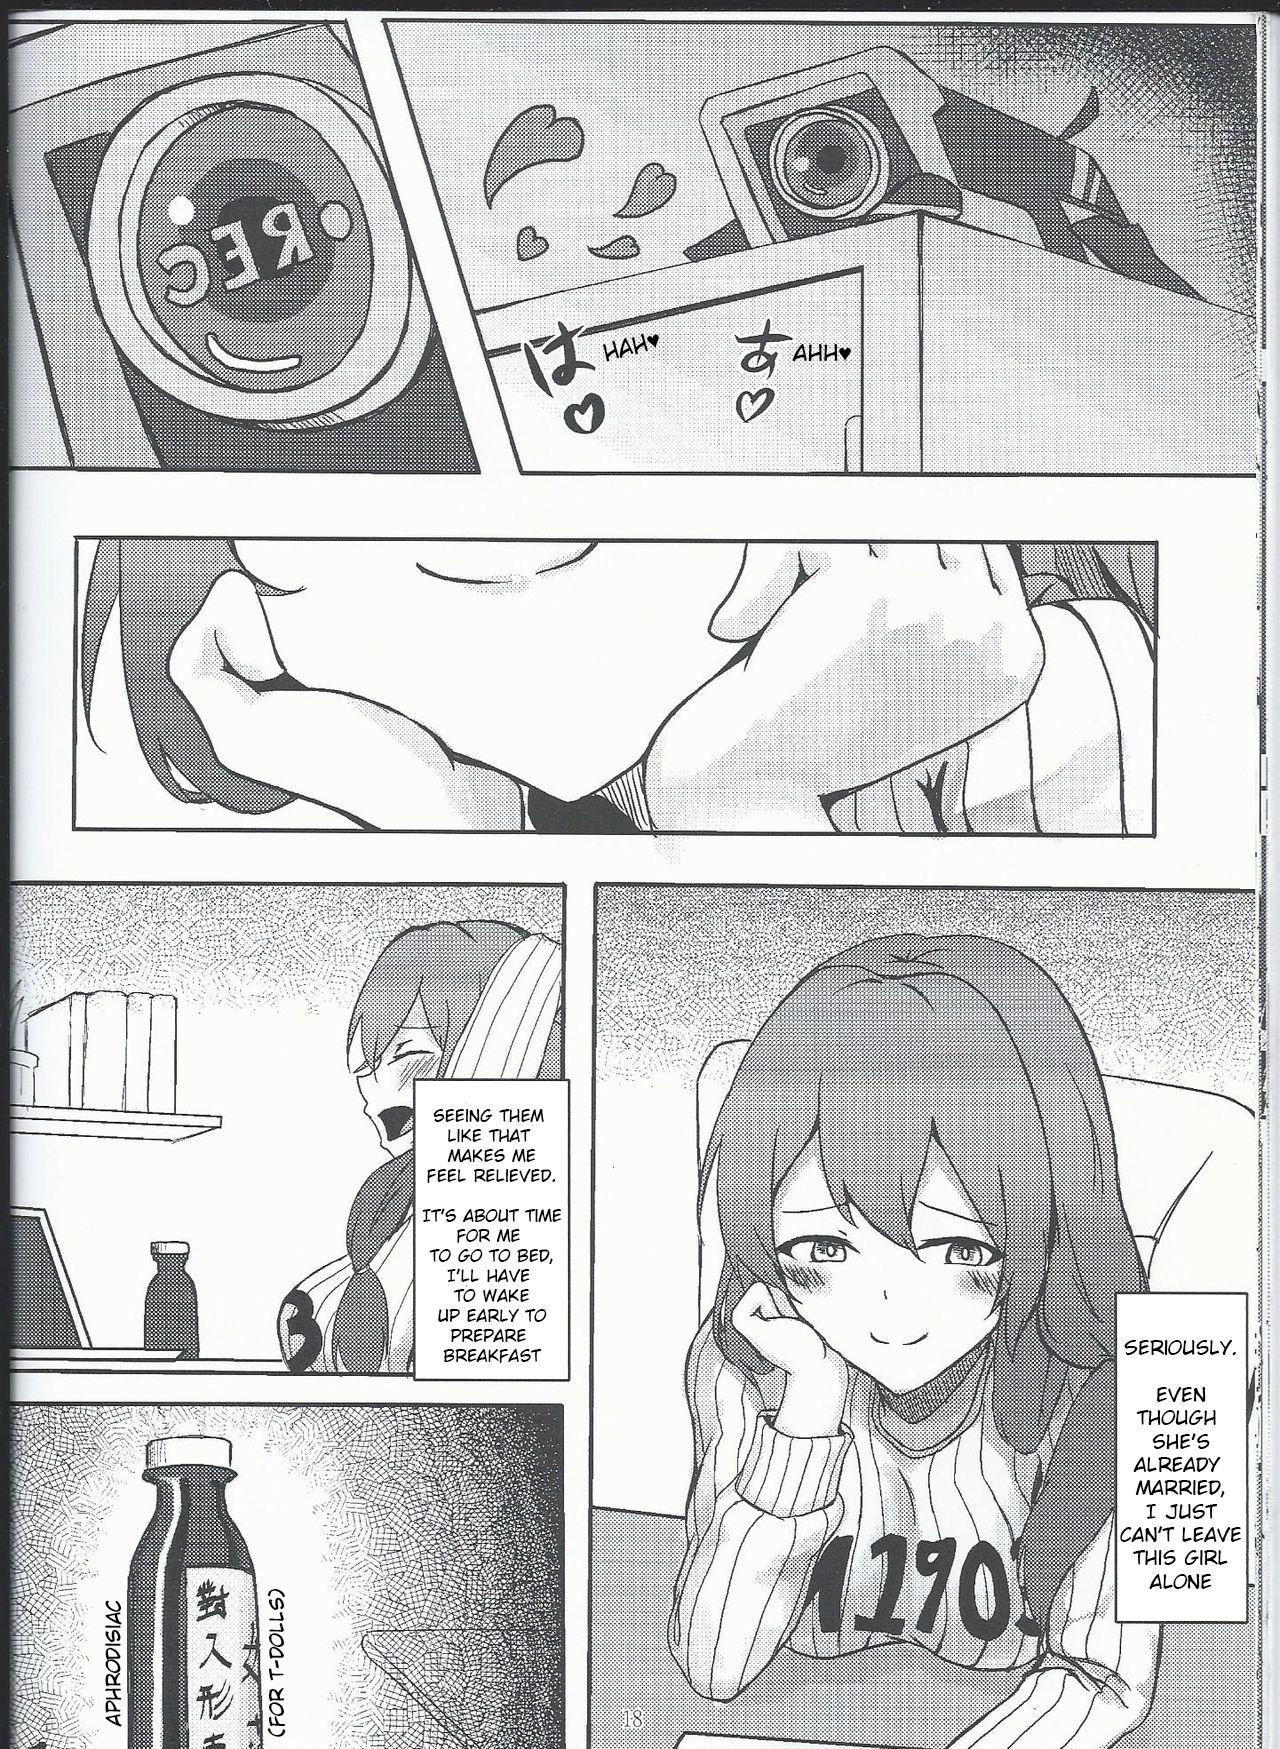 I don't know what to title this book, but anyway it's about WA2000 16